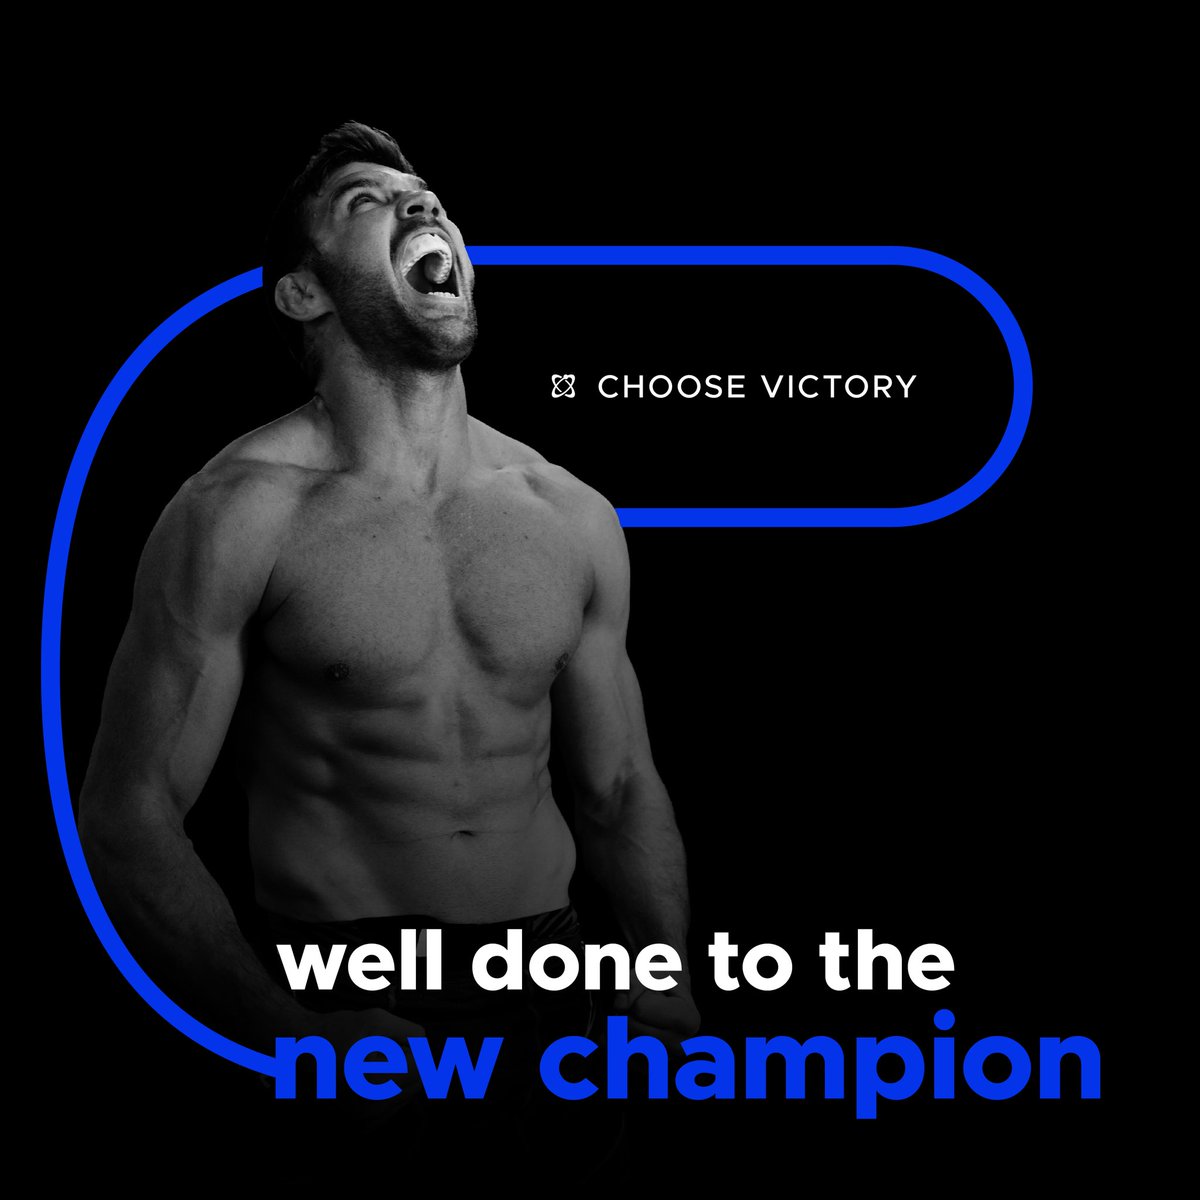 Nou weet hulle wat ons weet! 🏆

Congratulations to the new Middleweight UFC Champion! 👏

#AndNew #UFCChampion #teamUSN #mma #suidafrika #middleweight